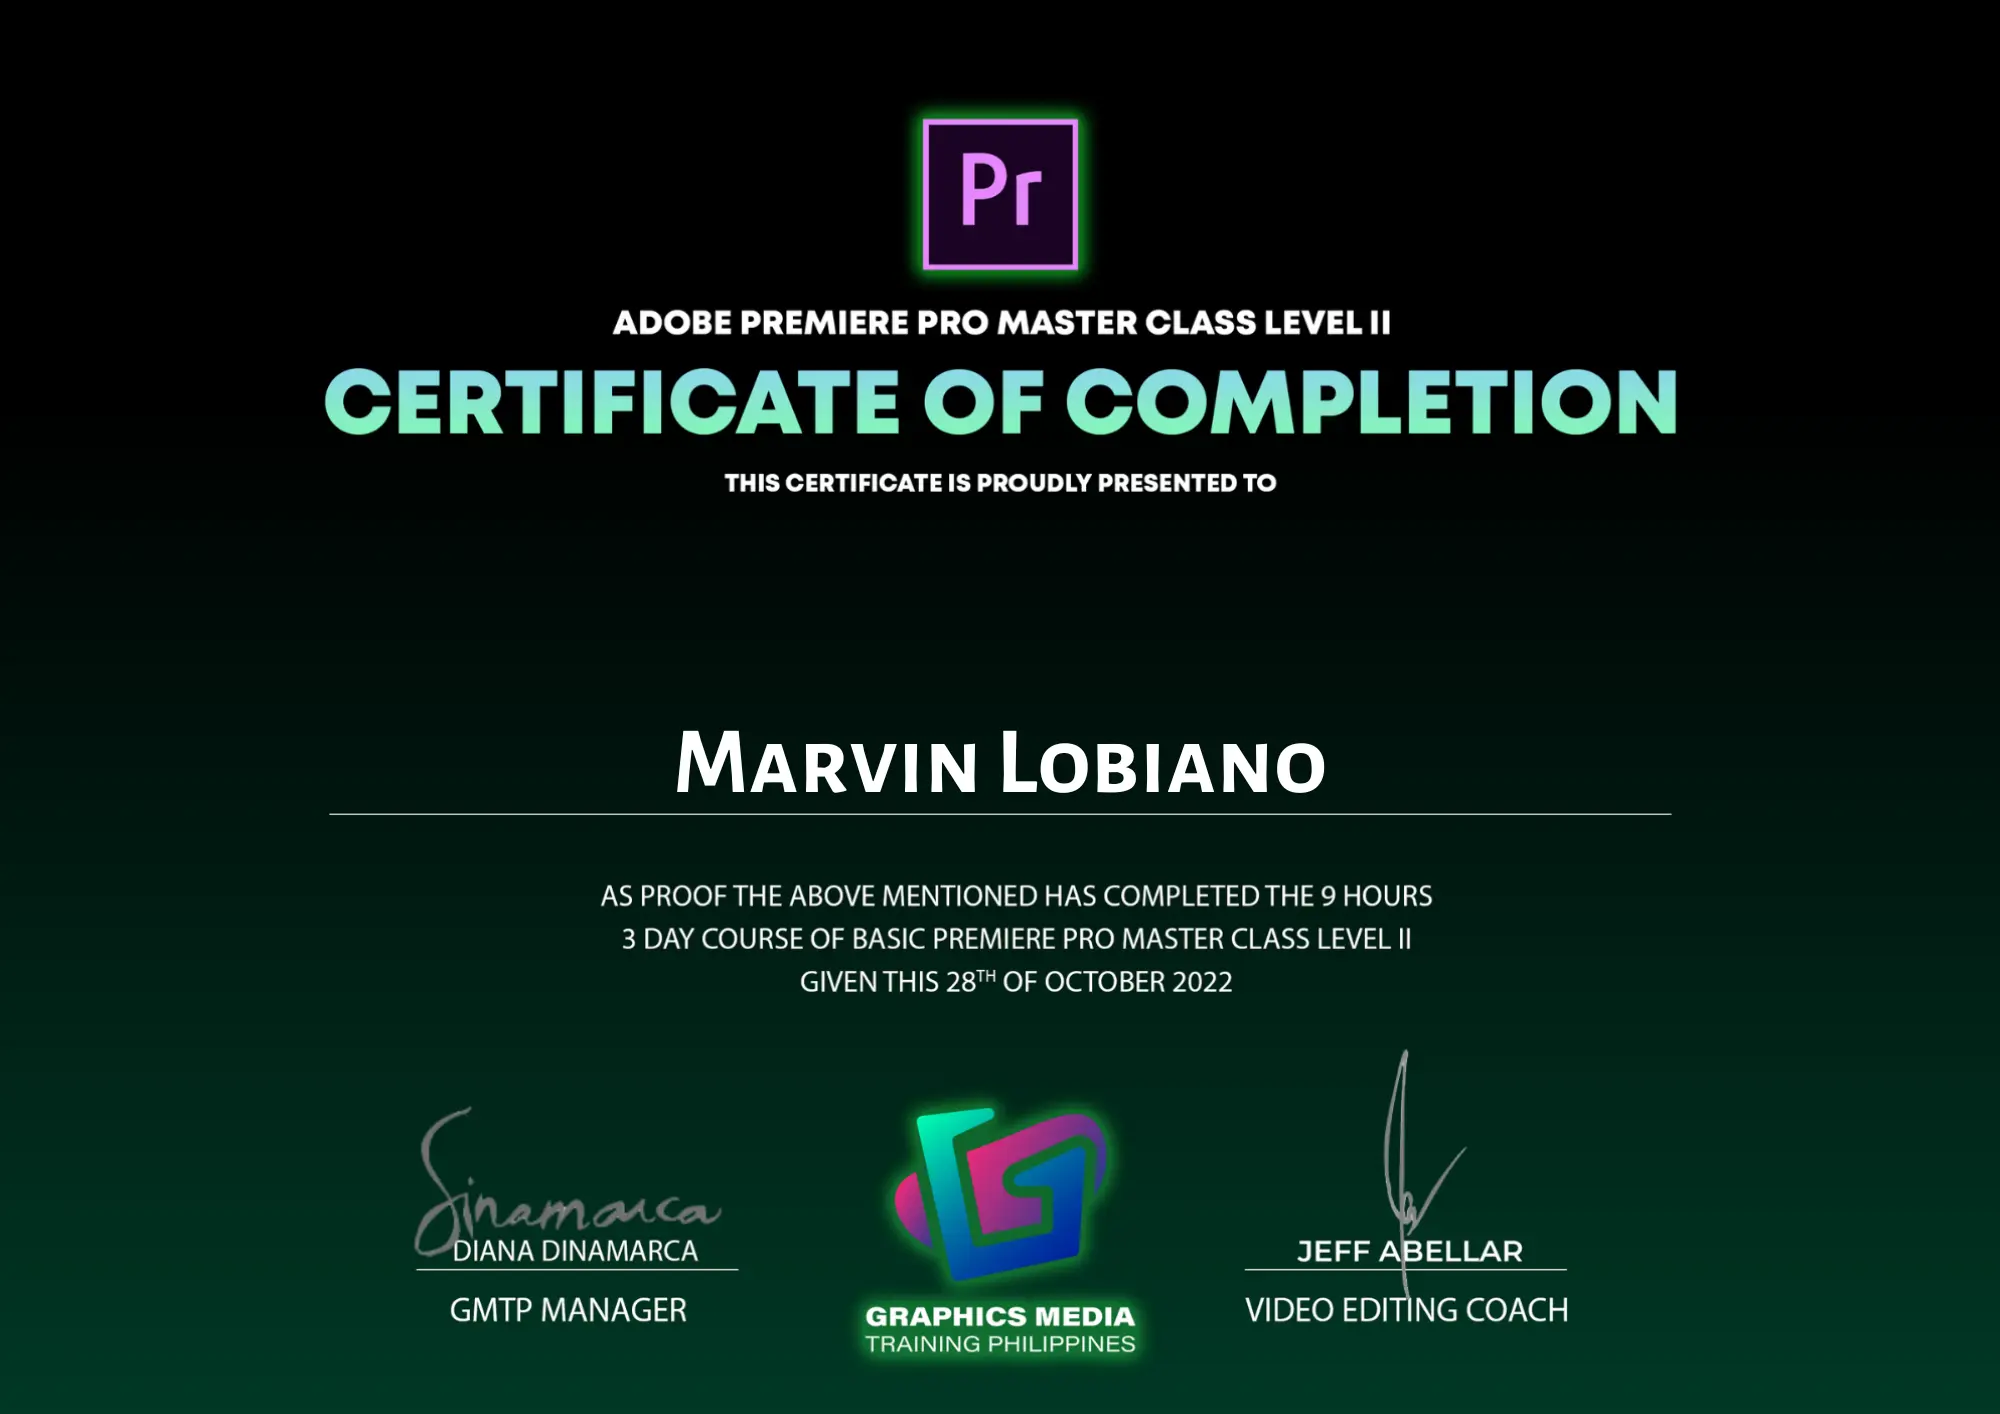 Marvin Lobiano has a Freelance Advance Video Editor Certificate